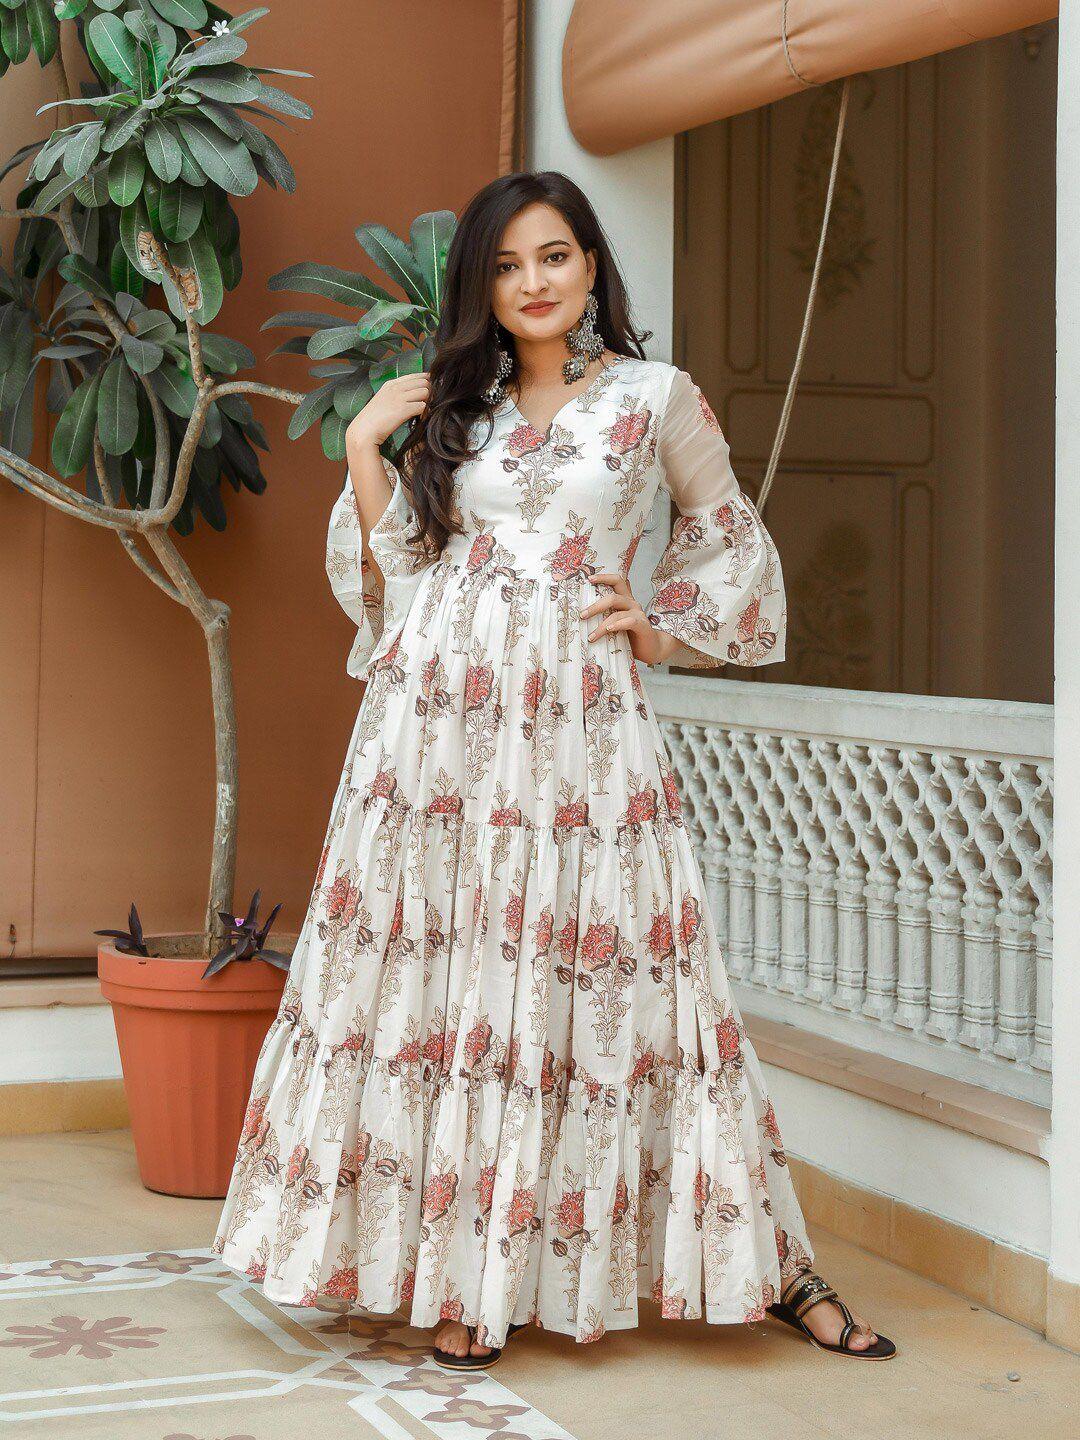 indian virasat white & brown floral tiered cotton ethnic maxi dress